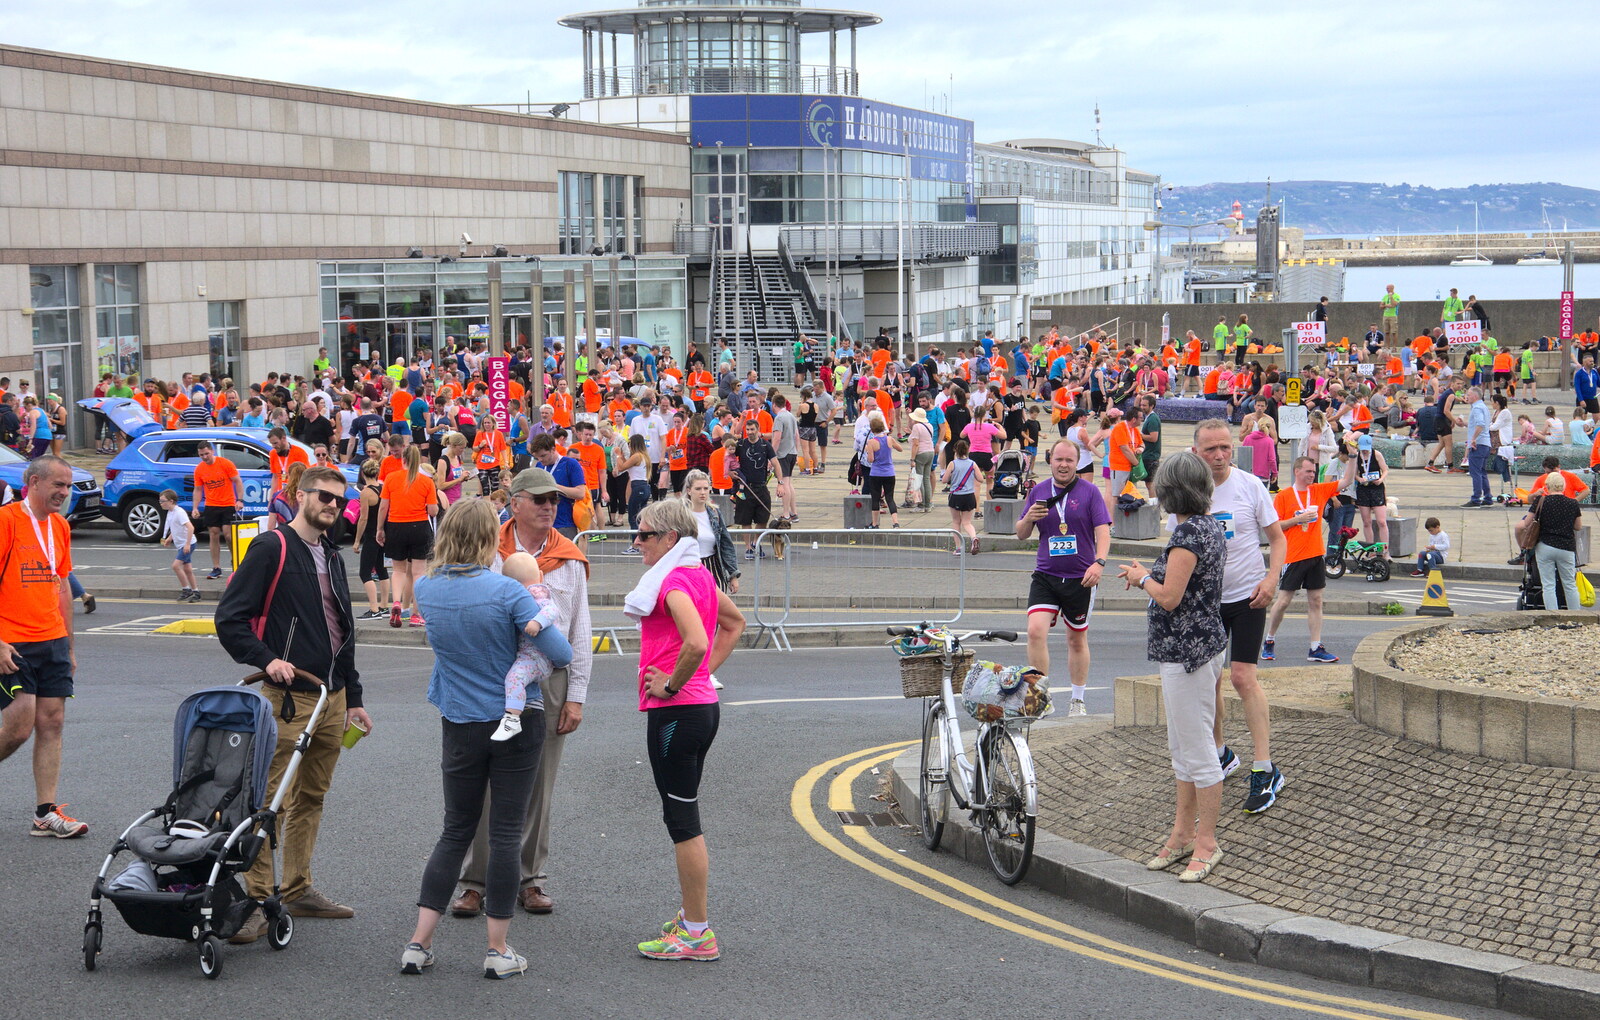 Milling around by the harbour building from The Dún Laoghaire 10k Run, County Dublin, Ireland - 6th August 2018